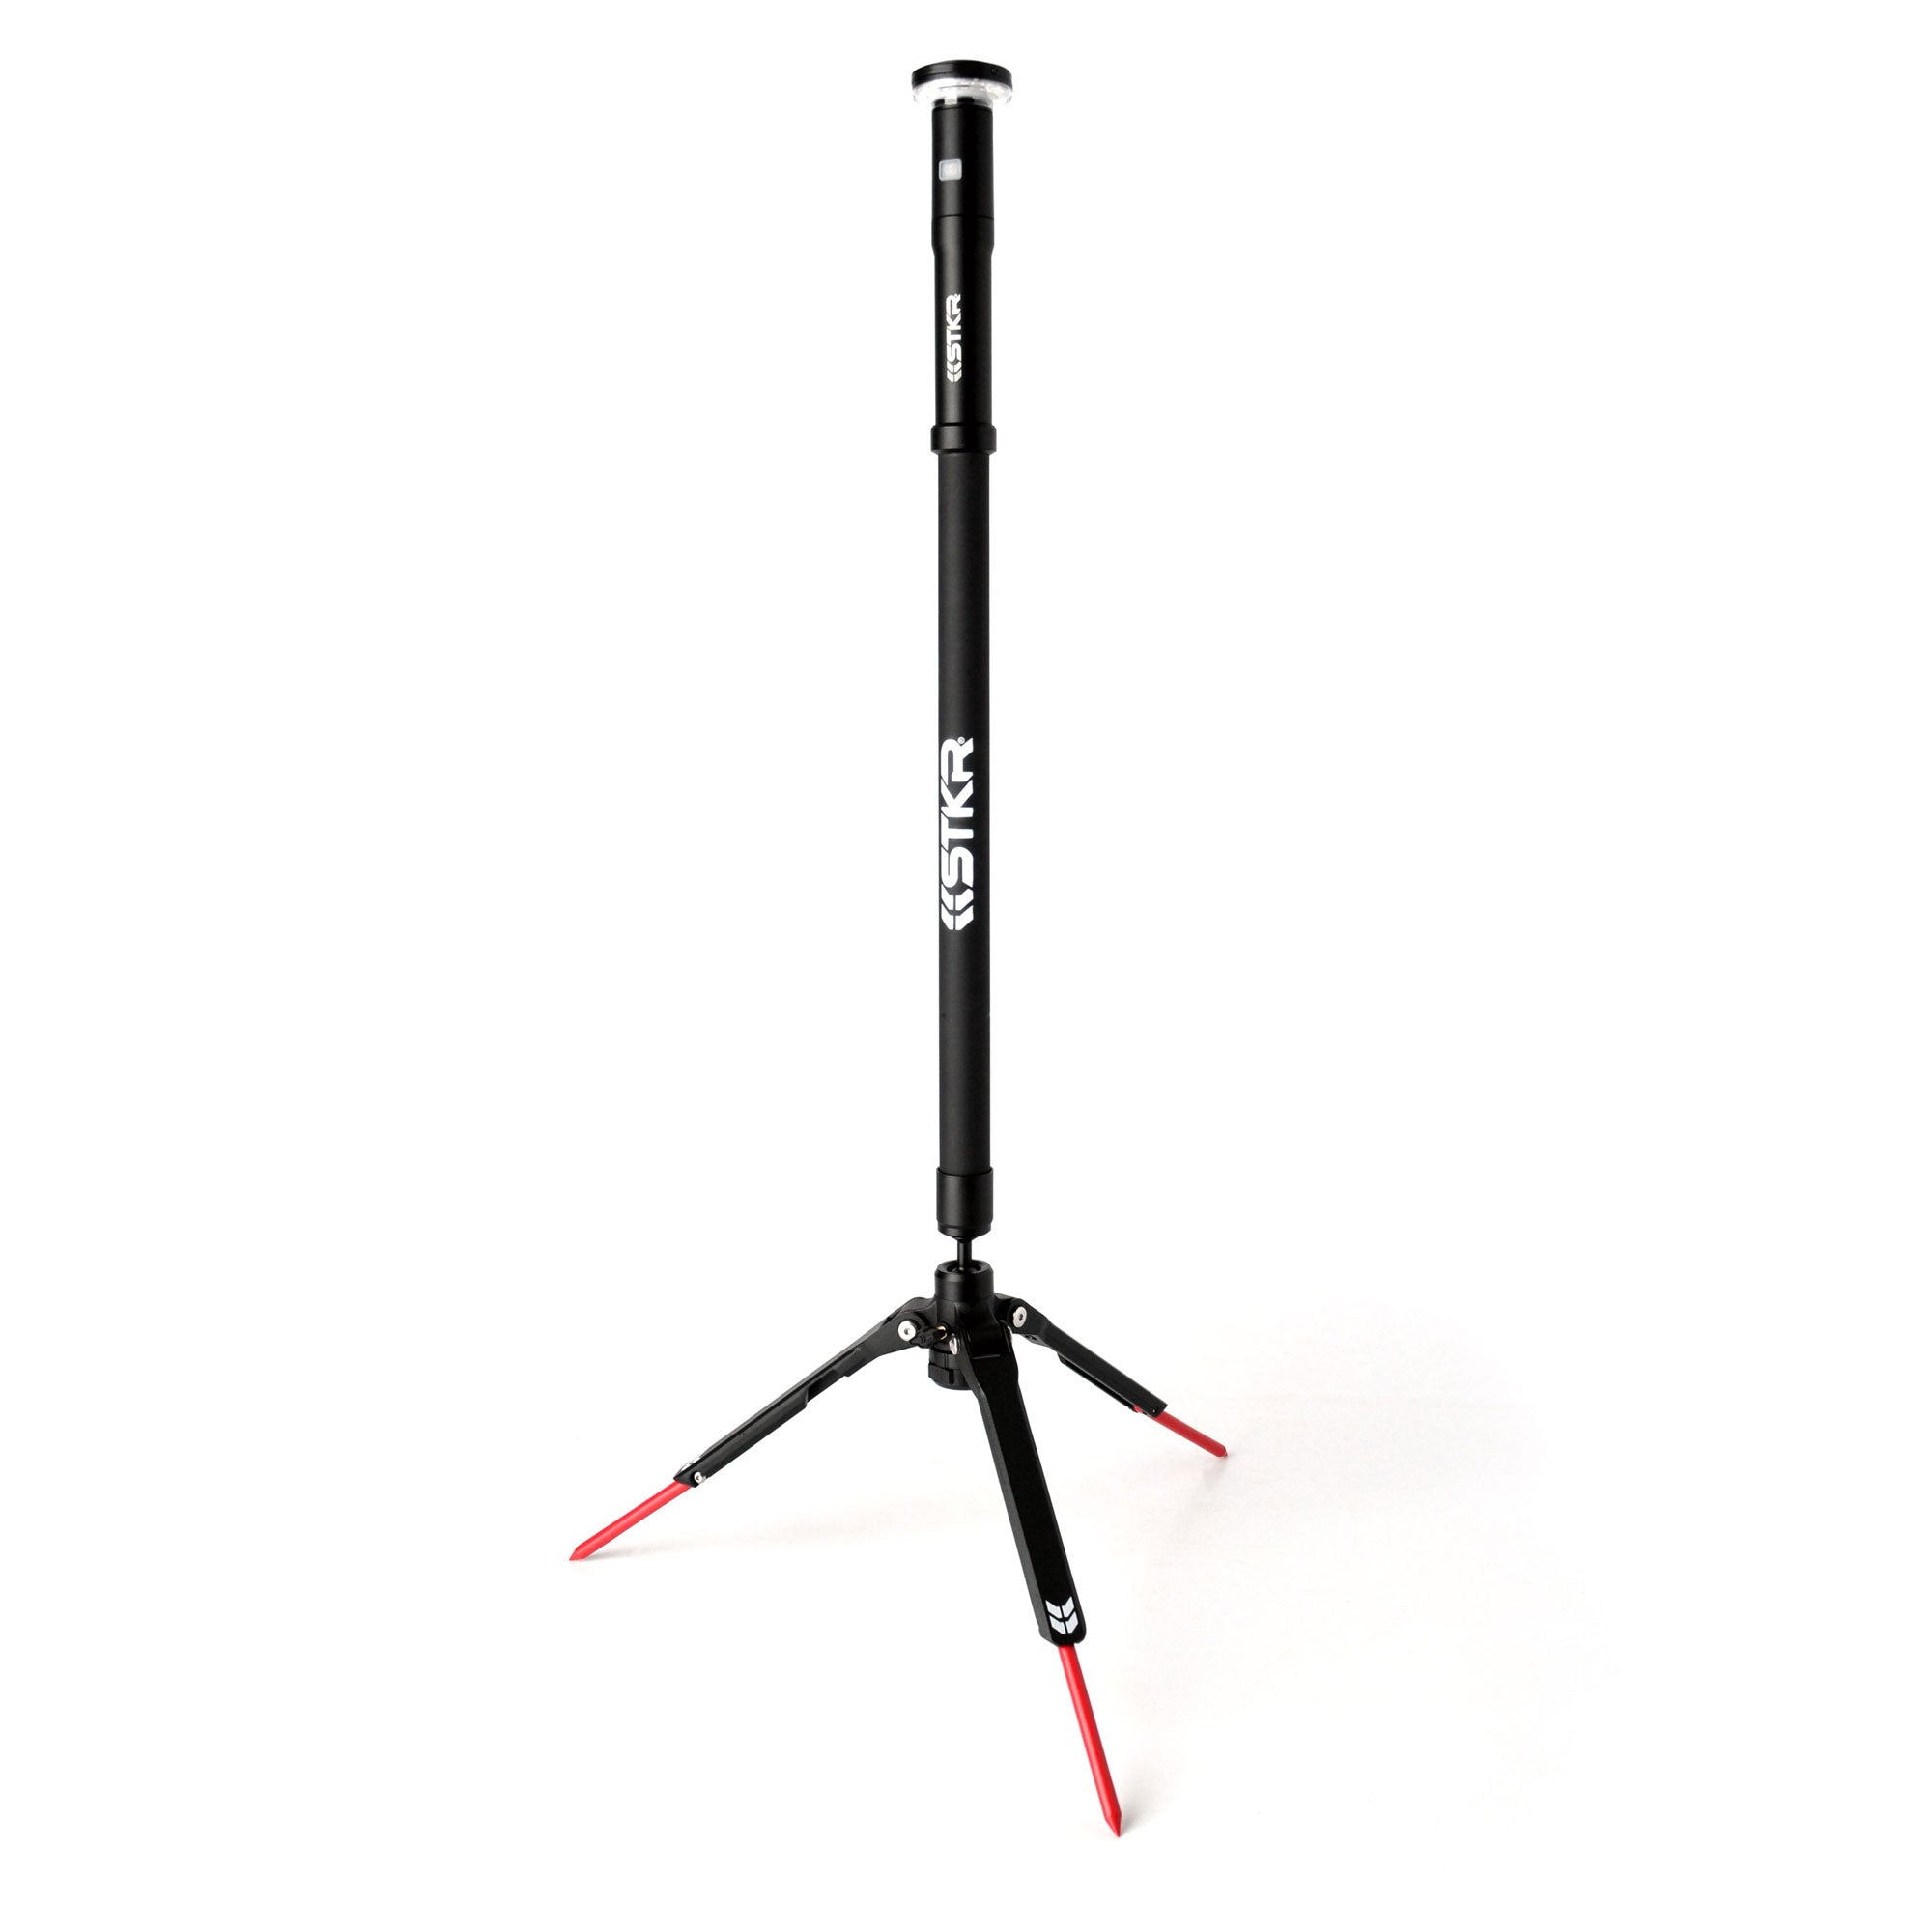 FLi-PRO Telescoping Light with removable flashlight by STKR Concepts